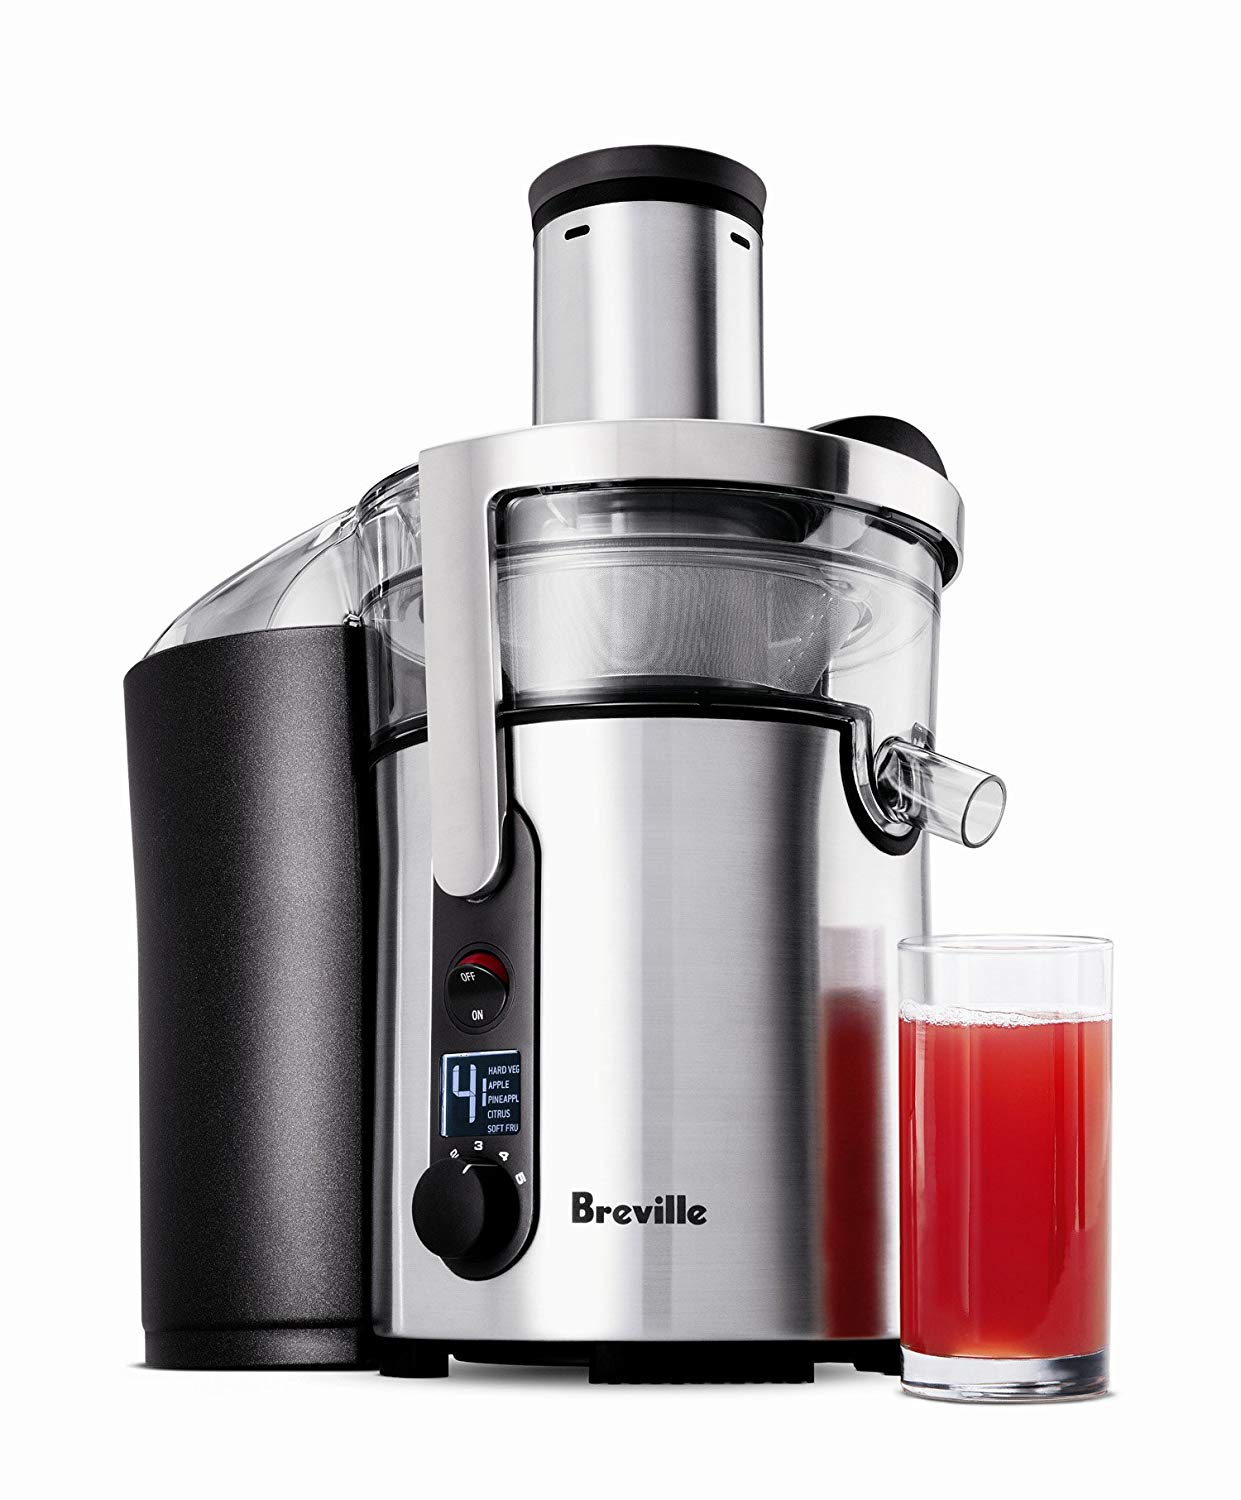 Breville BJE510XL Juicer Review